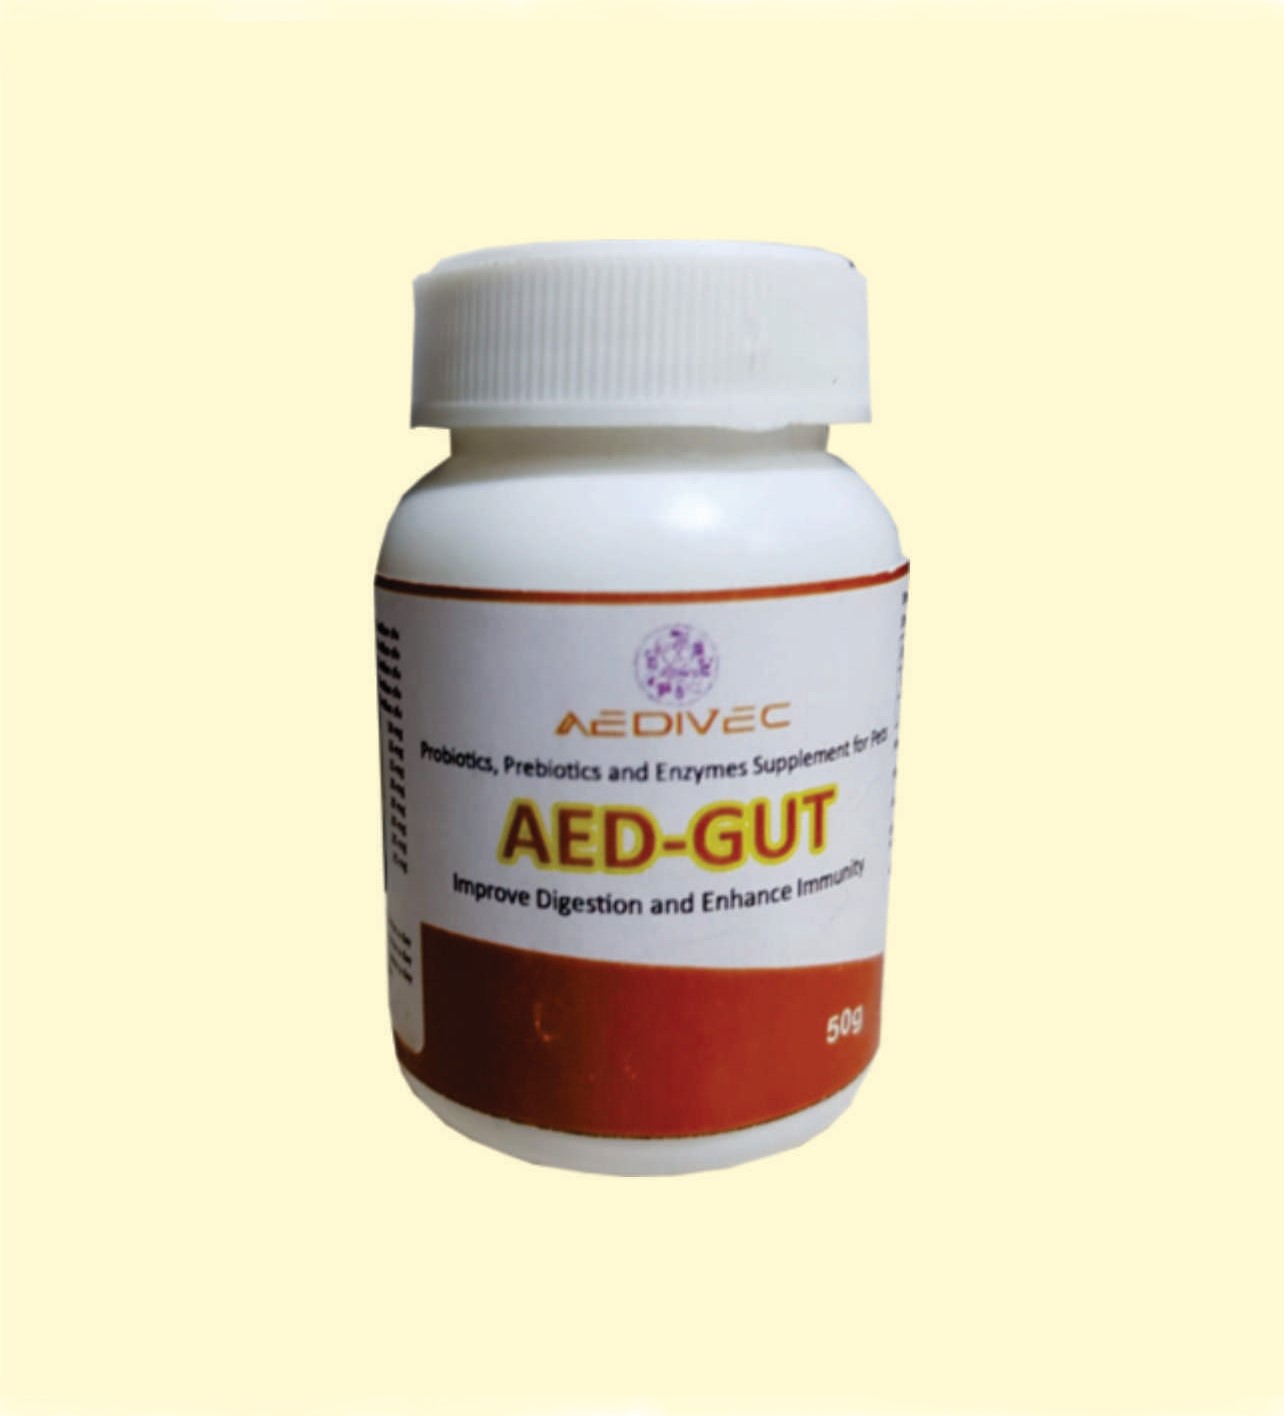 AED-GUT